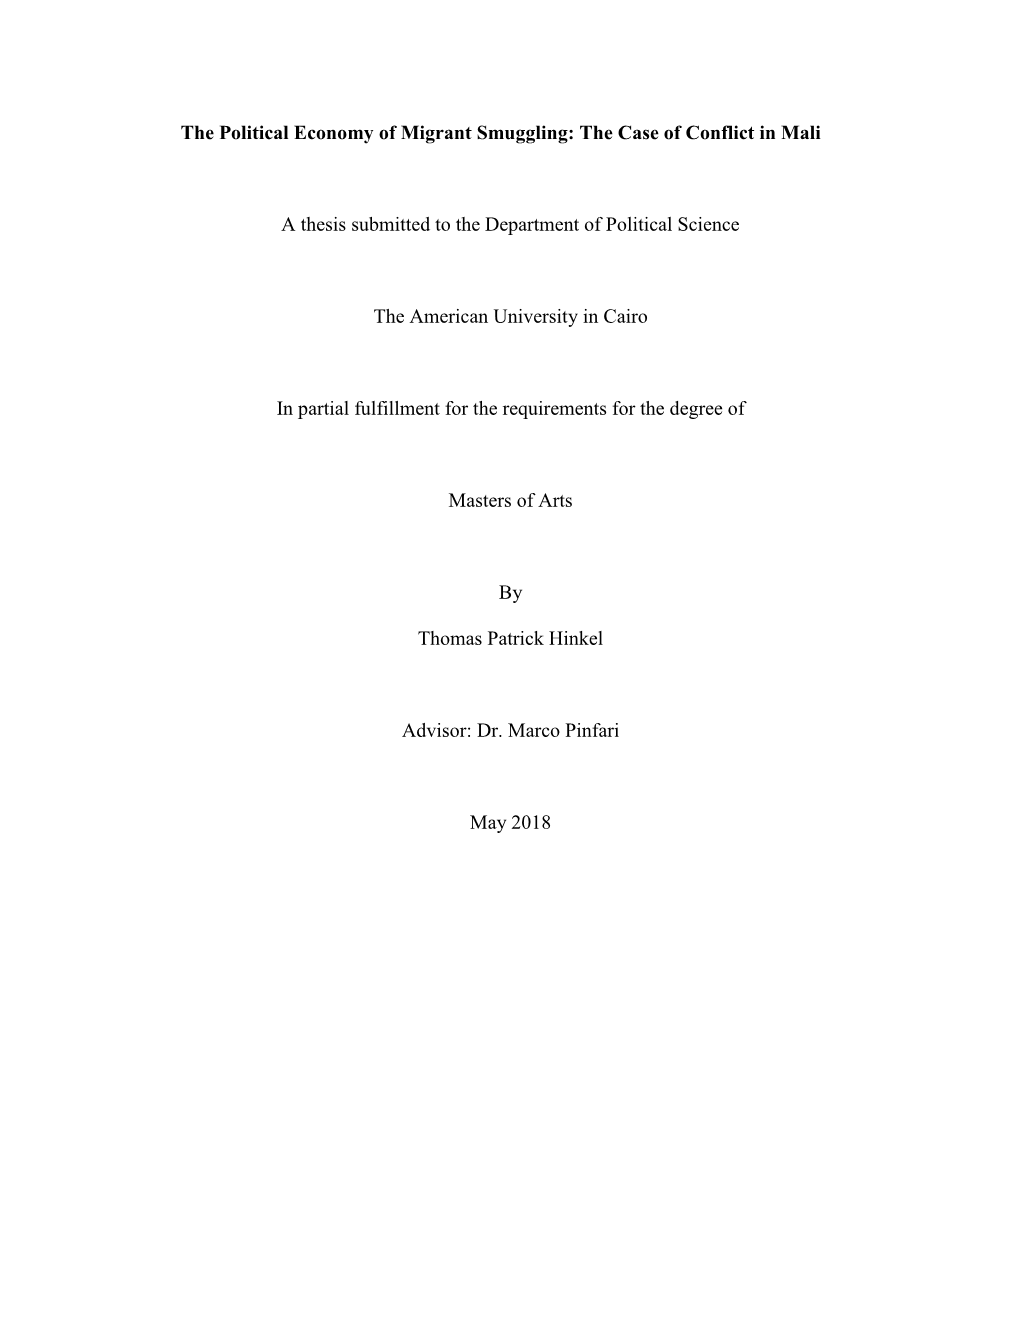 The Political Economy of Migrant Smuggling: the Case of Conflict in Mali a Thesis Submitted to the Department of Political Scien